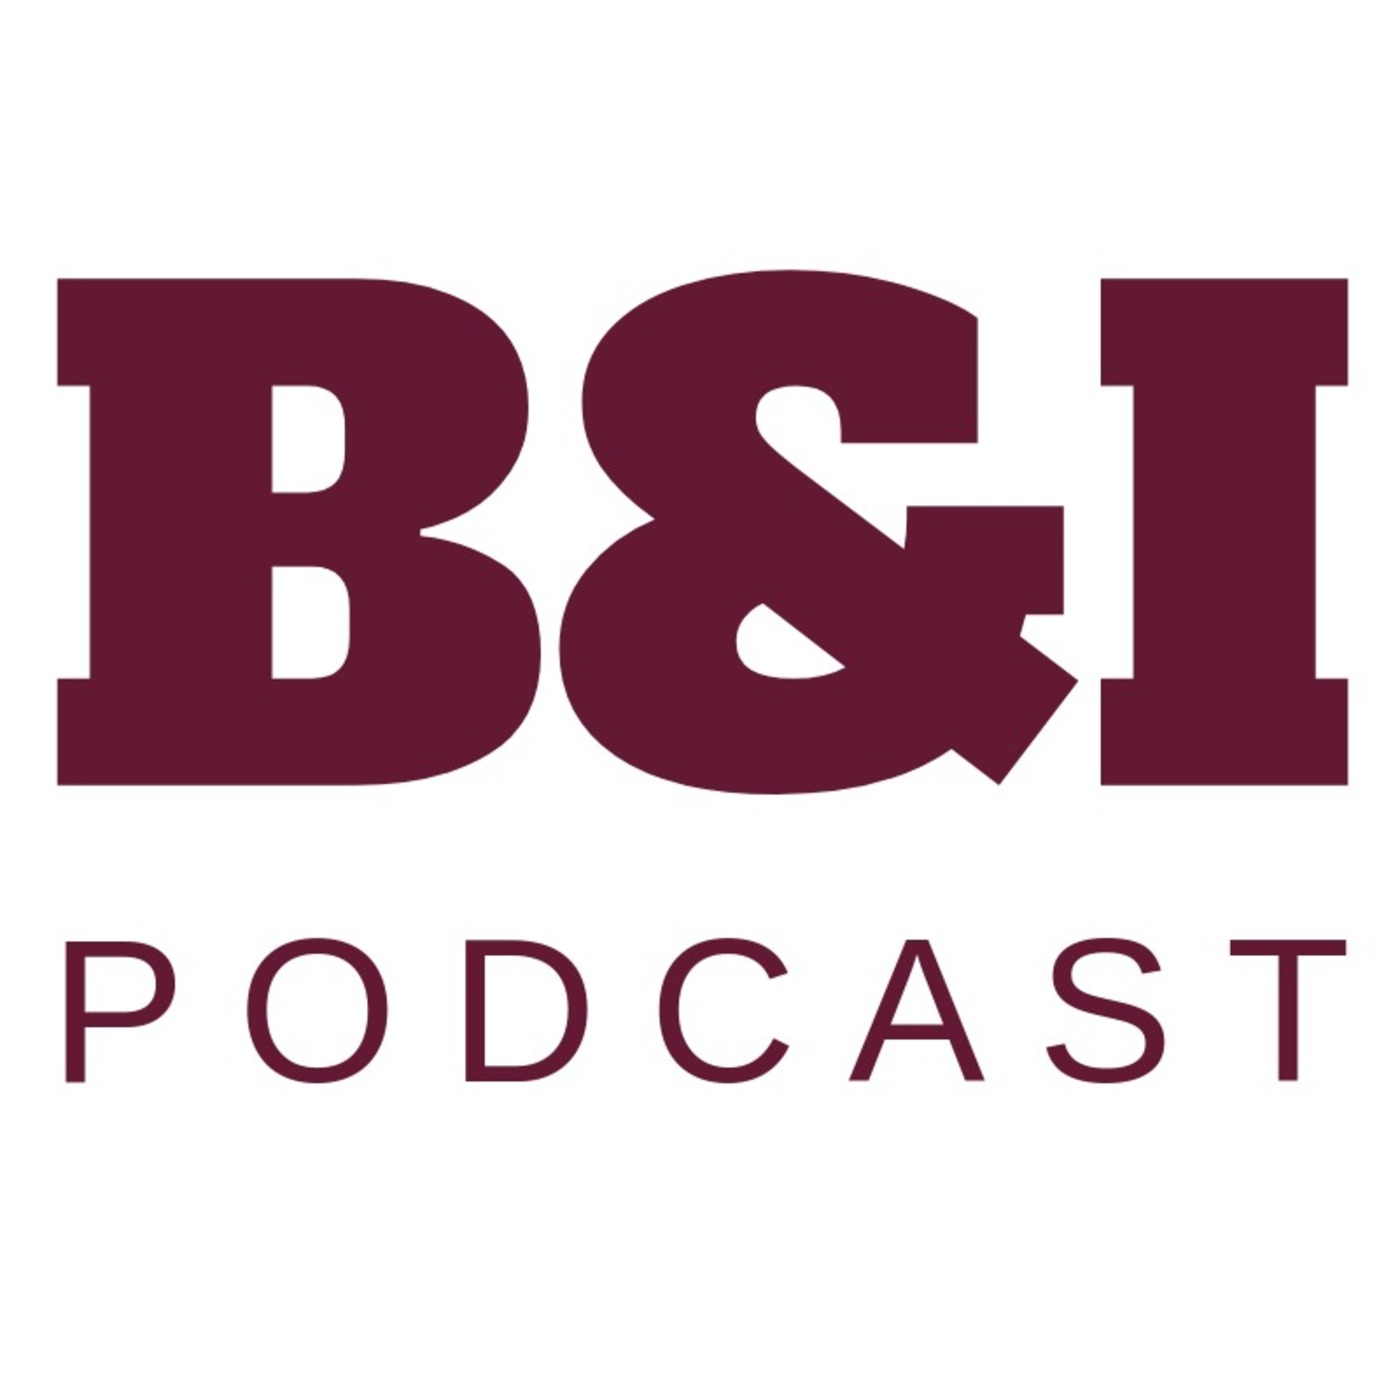 THE ALL NEW B&I PODCAST